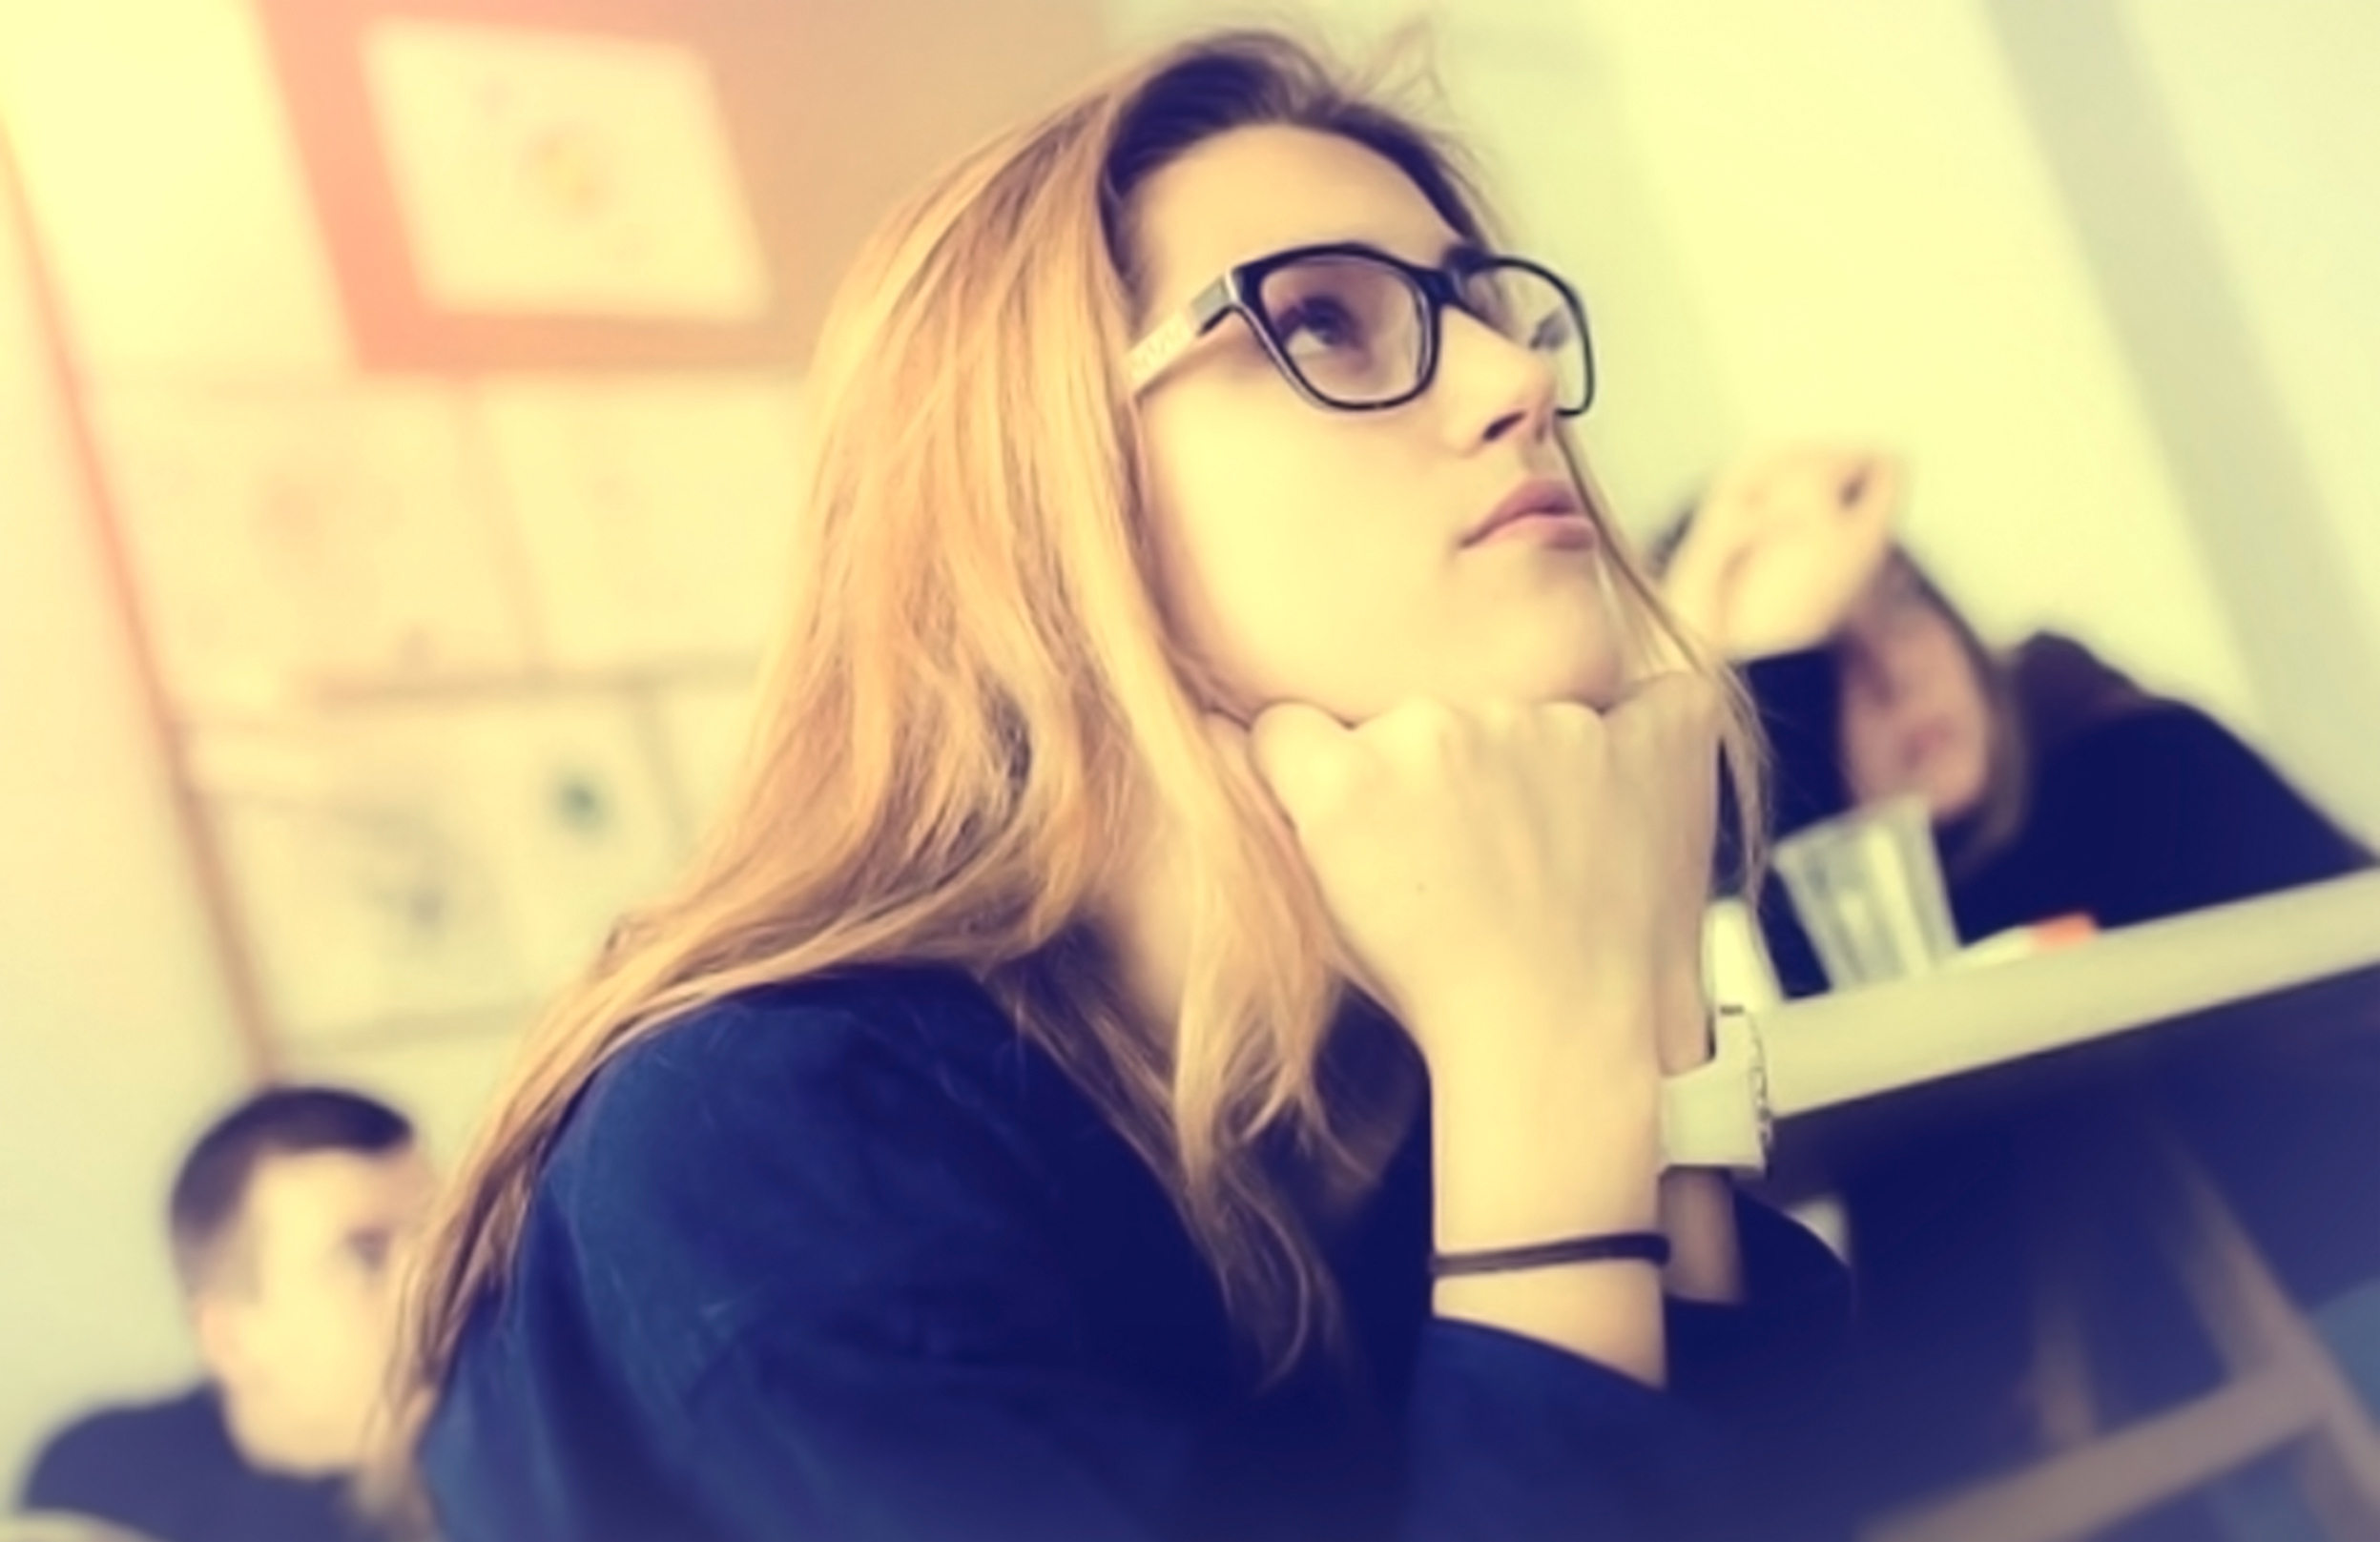 Hazy Vintage Looks - Young Woman with Glasses - Attentive - Classroom, Adult, Silence, Learning, Lecture, HQ Photo